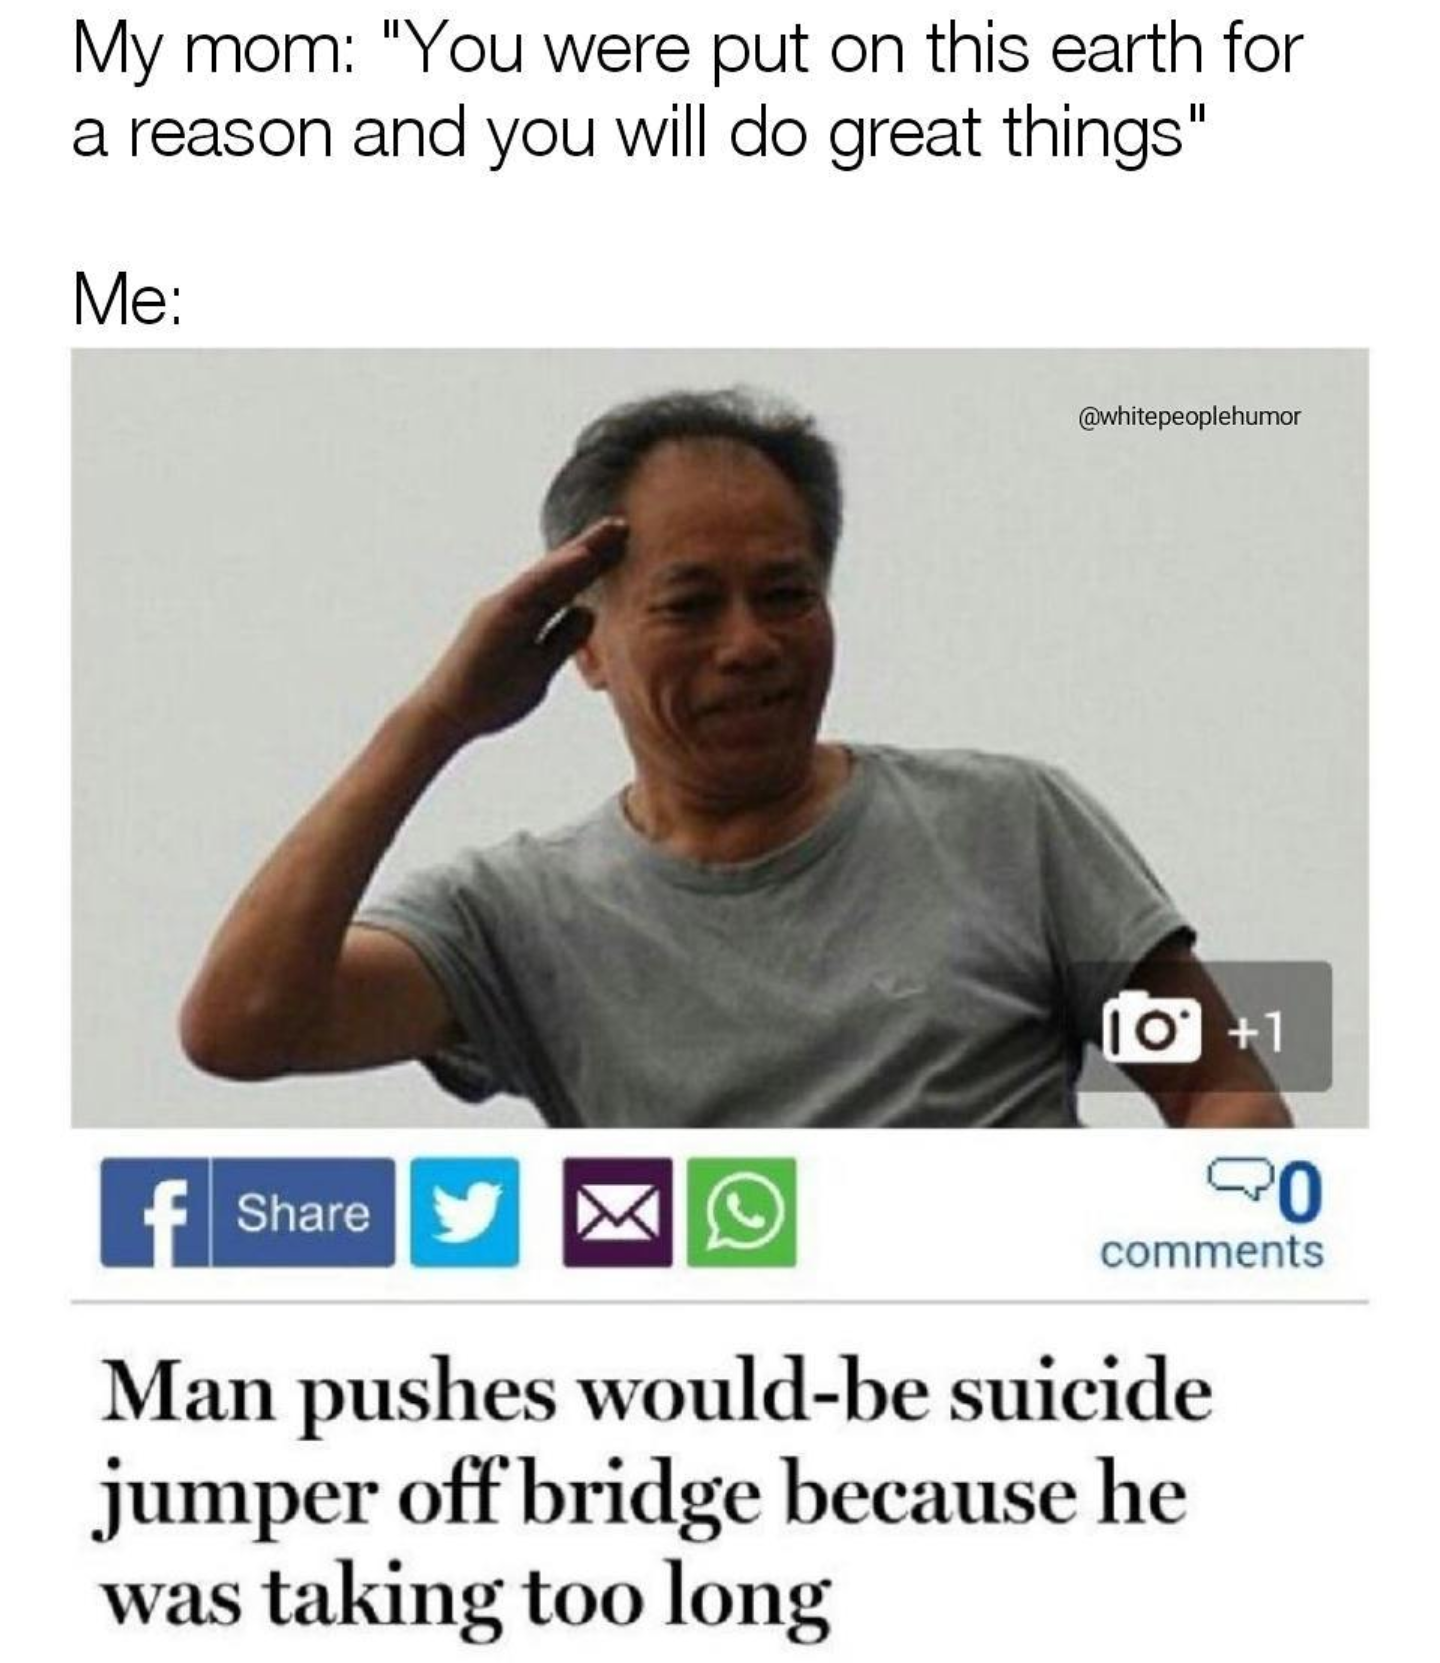 memes dankest memes 4chan - My mom "You were put on this earth for a reason and you will do great things" Me whitepem or 10 1 f O 0 Man pushes wouldbe suicide jumper off bridge because he was taking too long